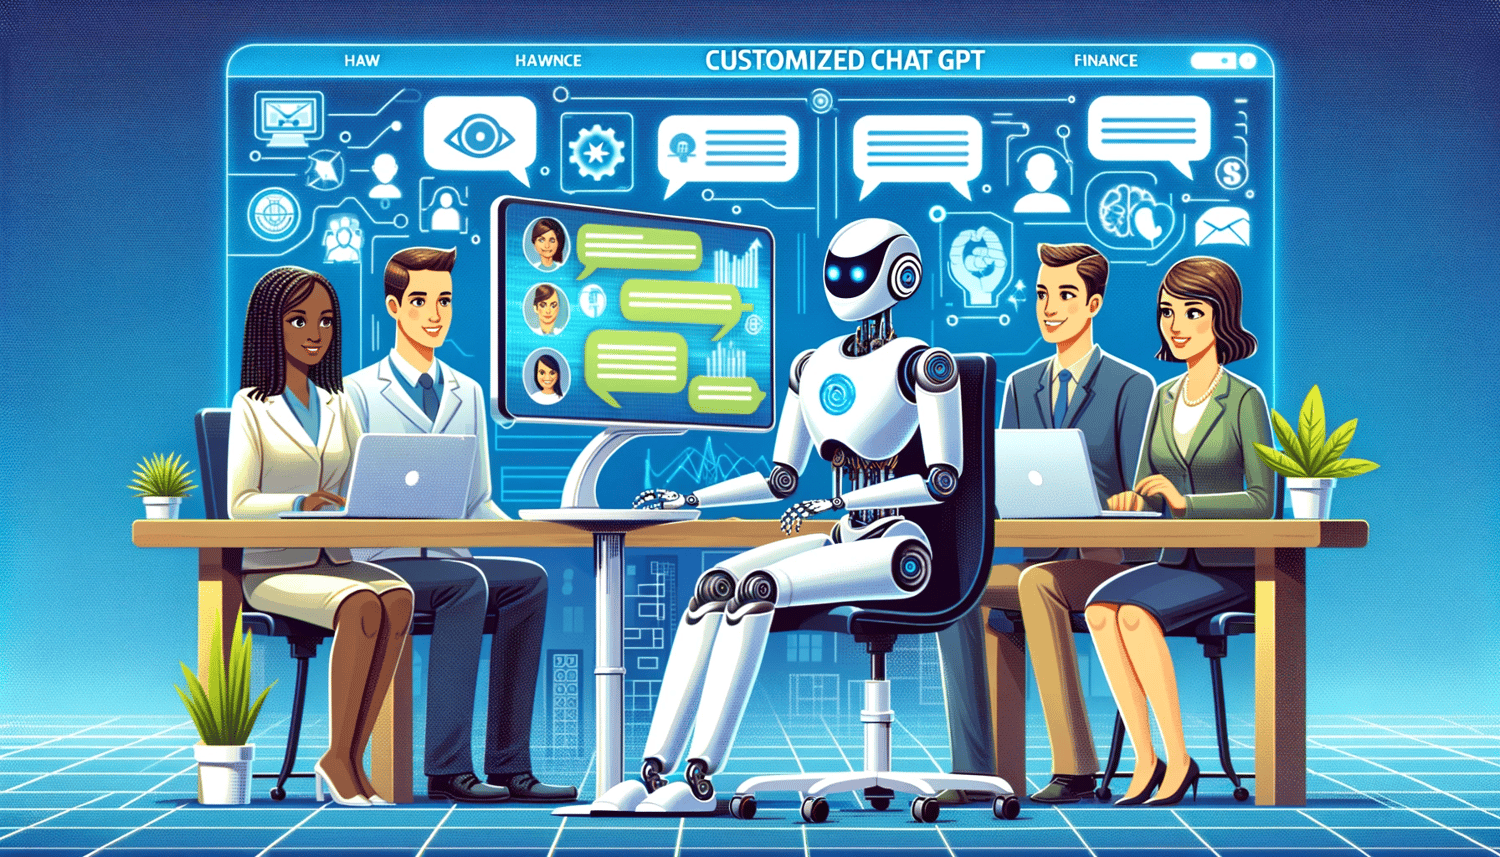 A humanoid robot sitting at a desk with a computer, engaged in a conversation with professionals